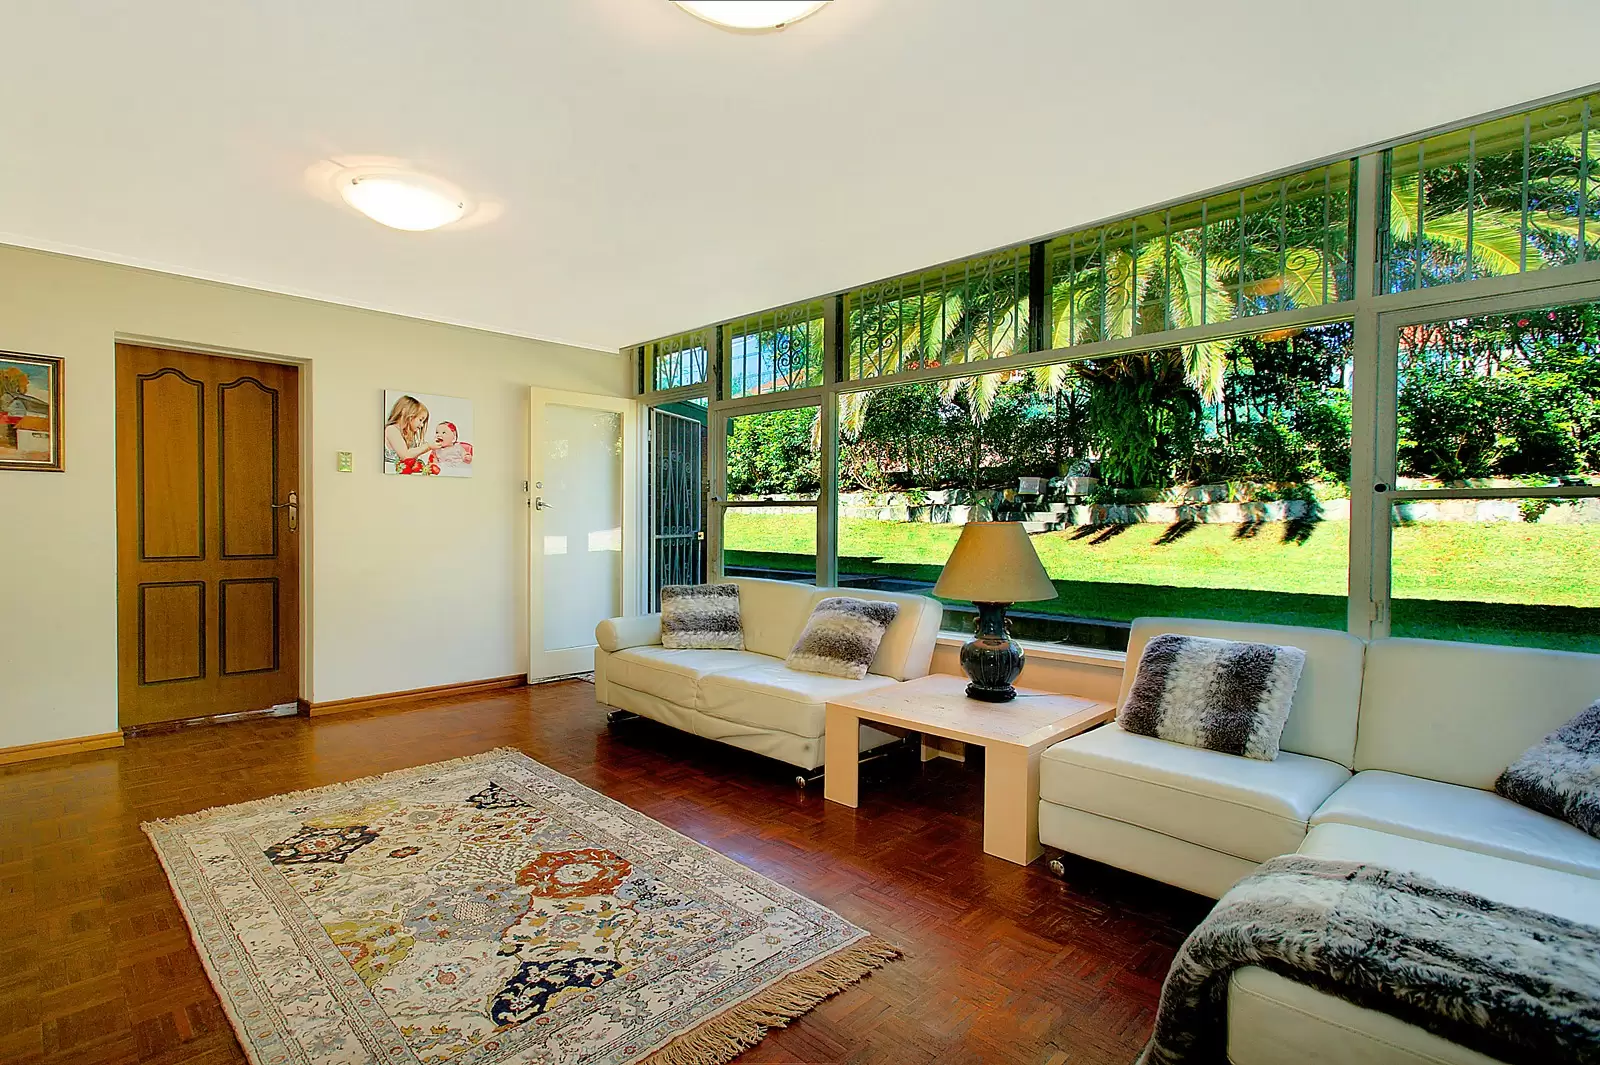 Photo #6: 15 Olphert Avenue, Vaucluse - Sold by Sydney Sotheby's International Realty